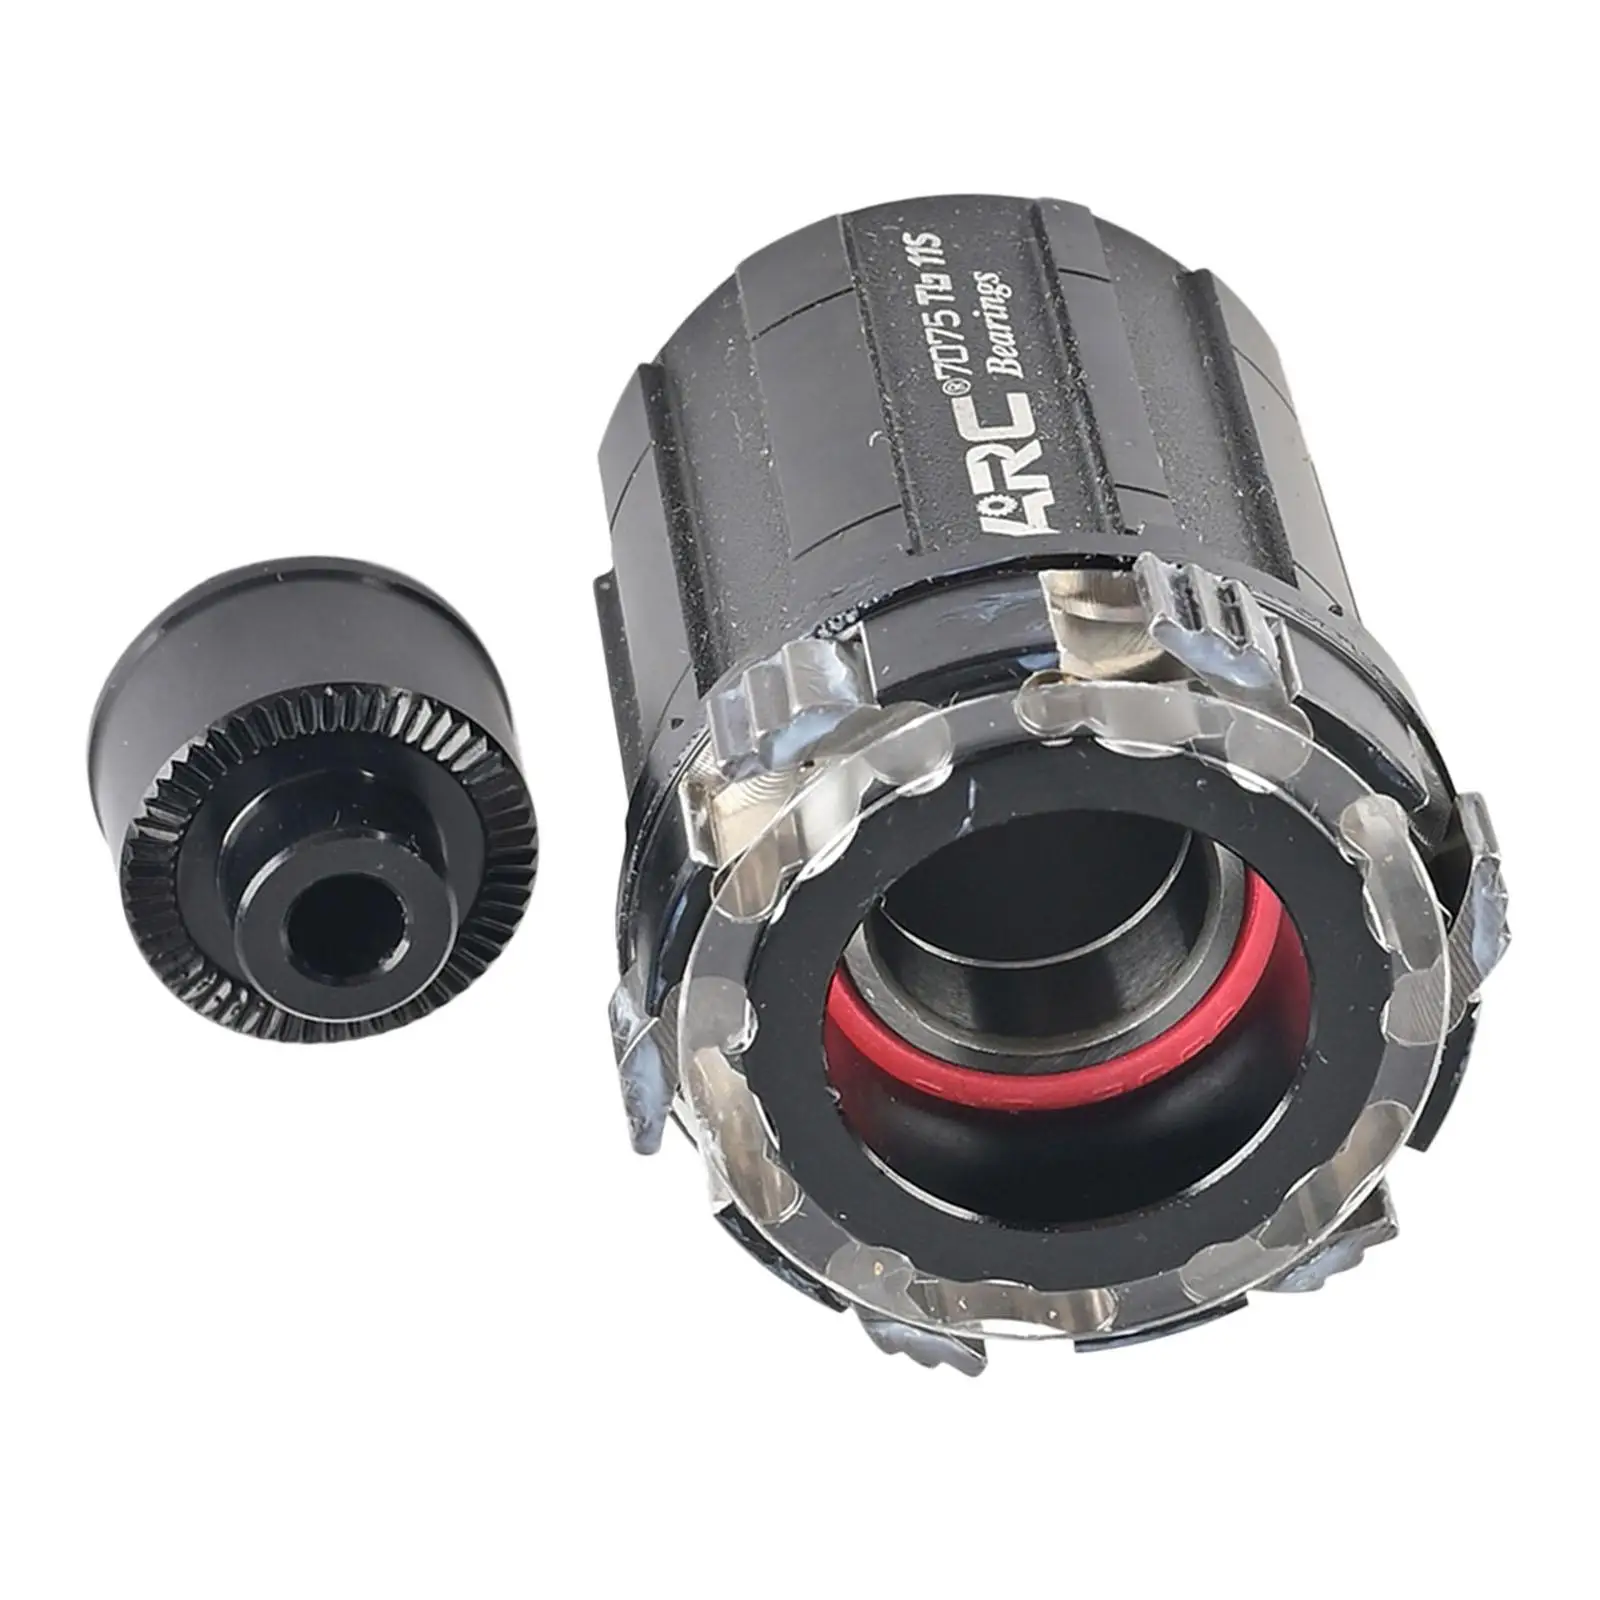 Standard XD/XDR  Classical Mountain   Seal Bearing 8-12 Speeds Adapter 6 Pawls Hub Parts Adaptor